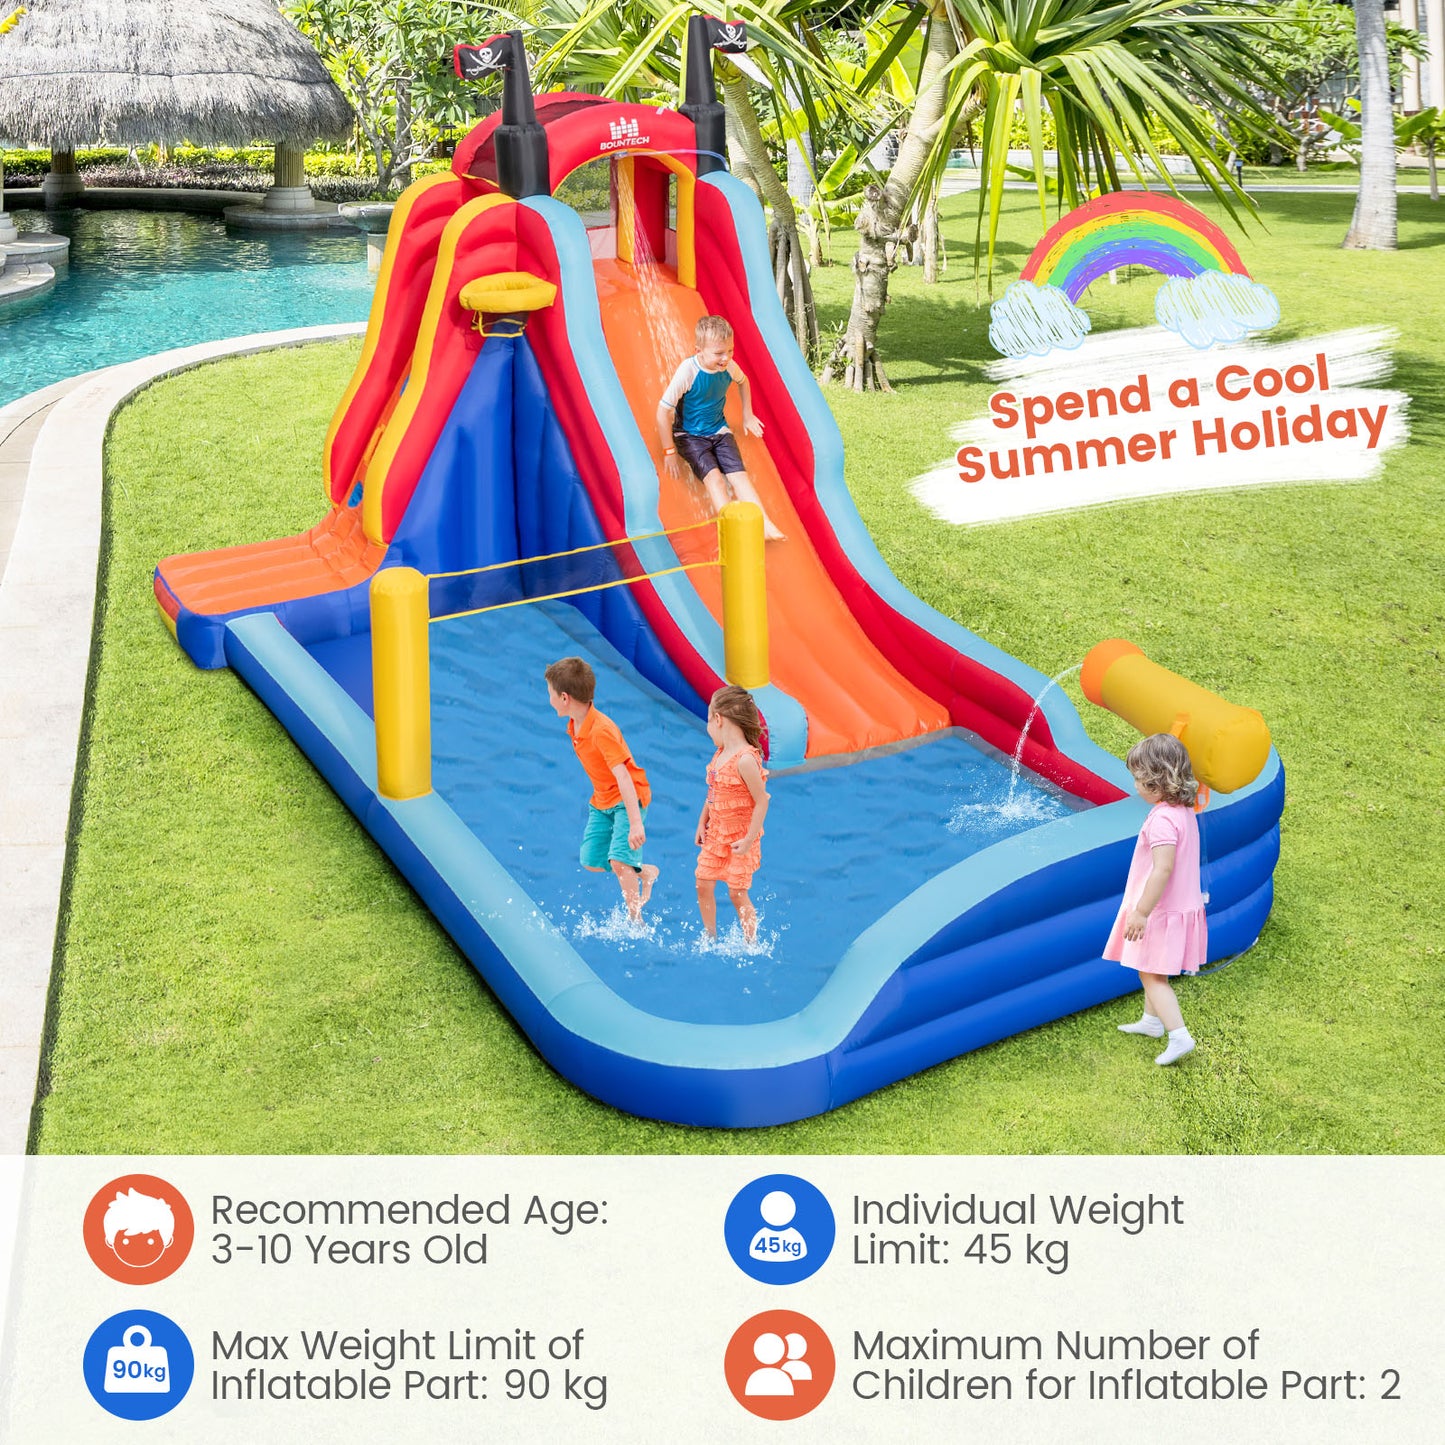 5-in-1 Pirate Theme Inflatable Water Slide Park with Slide